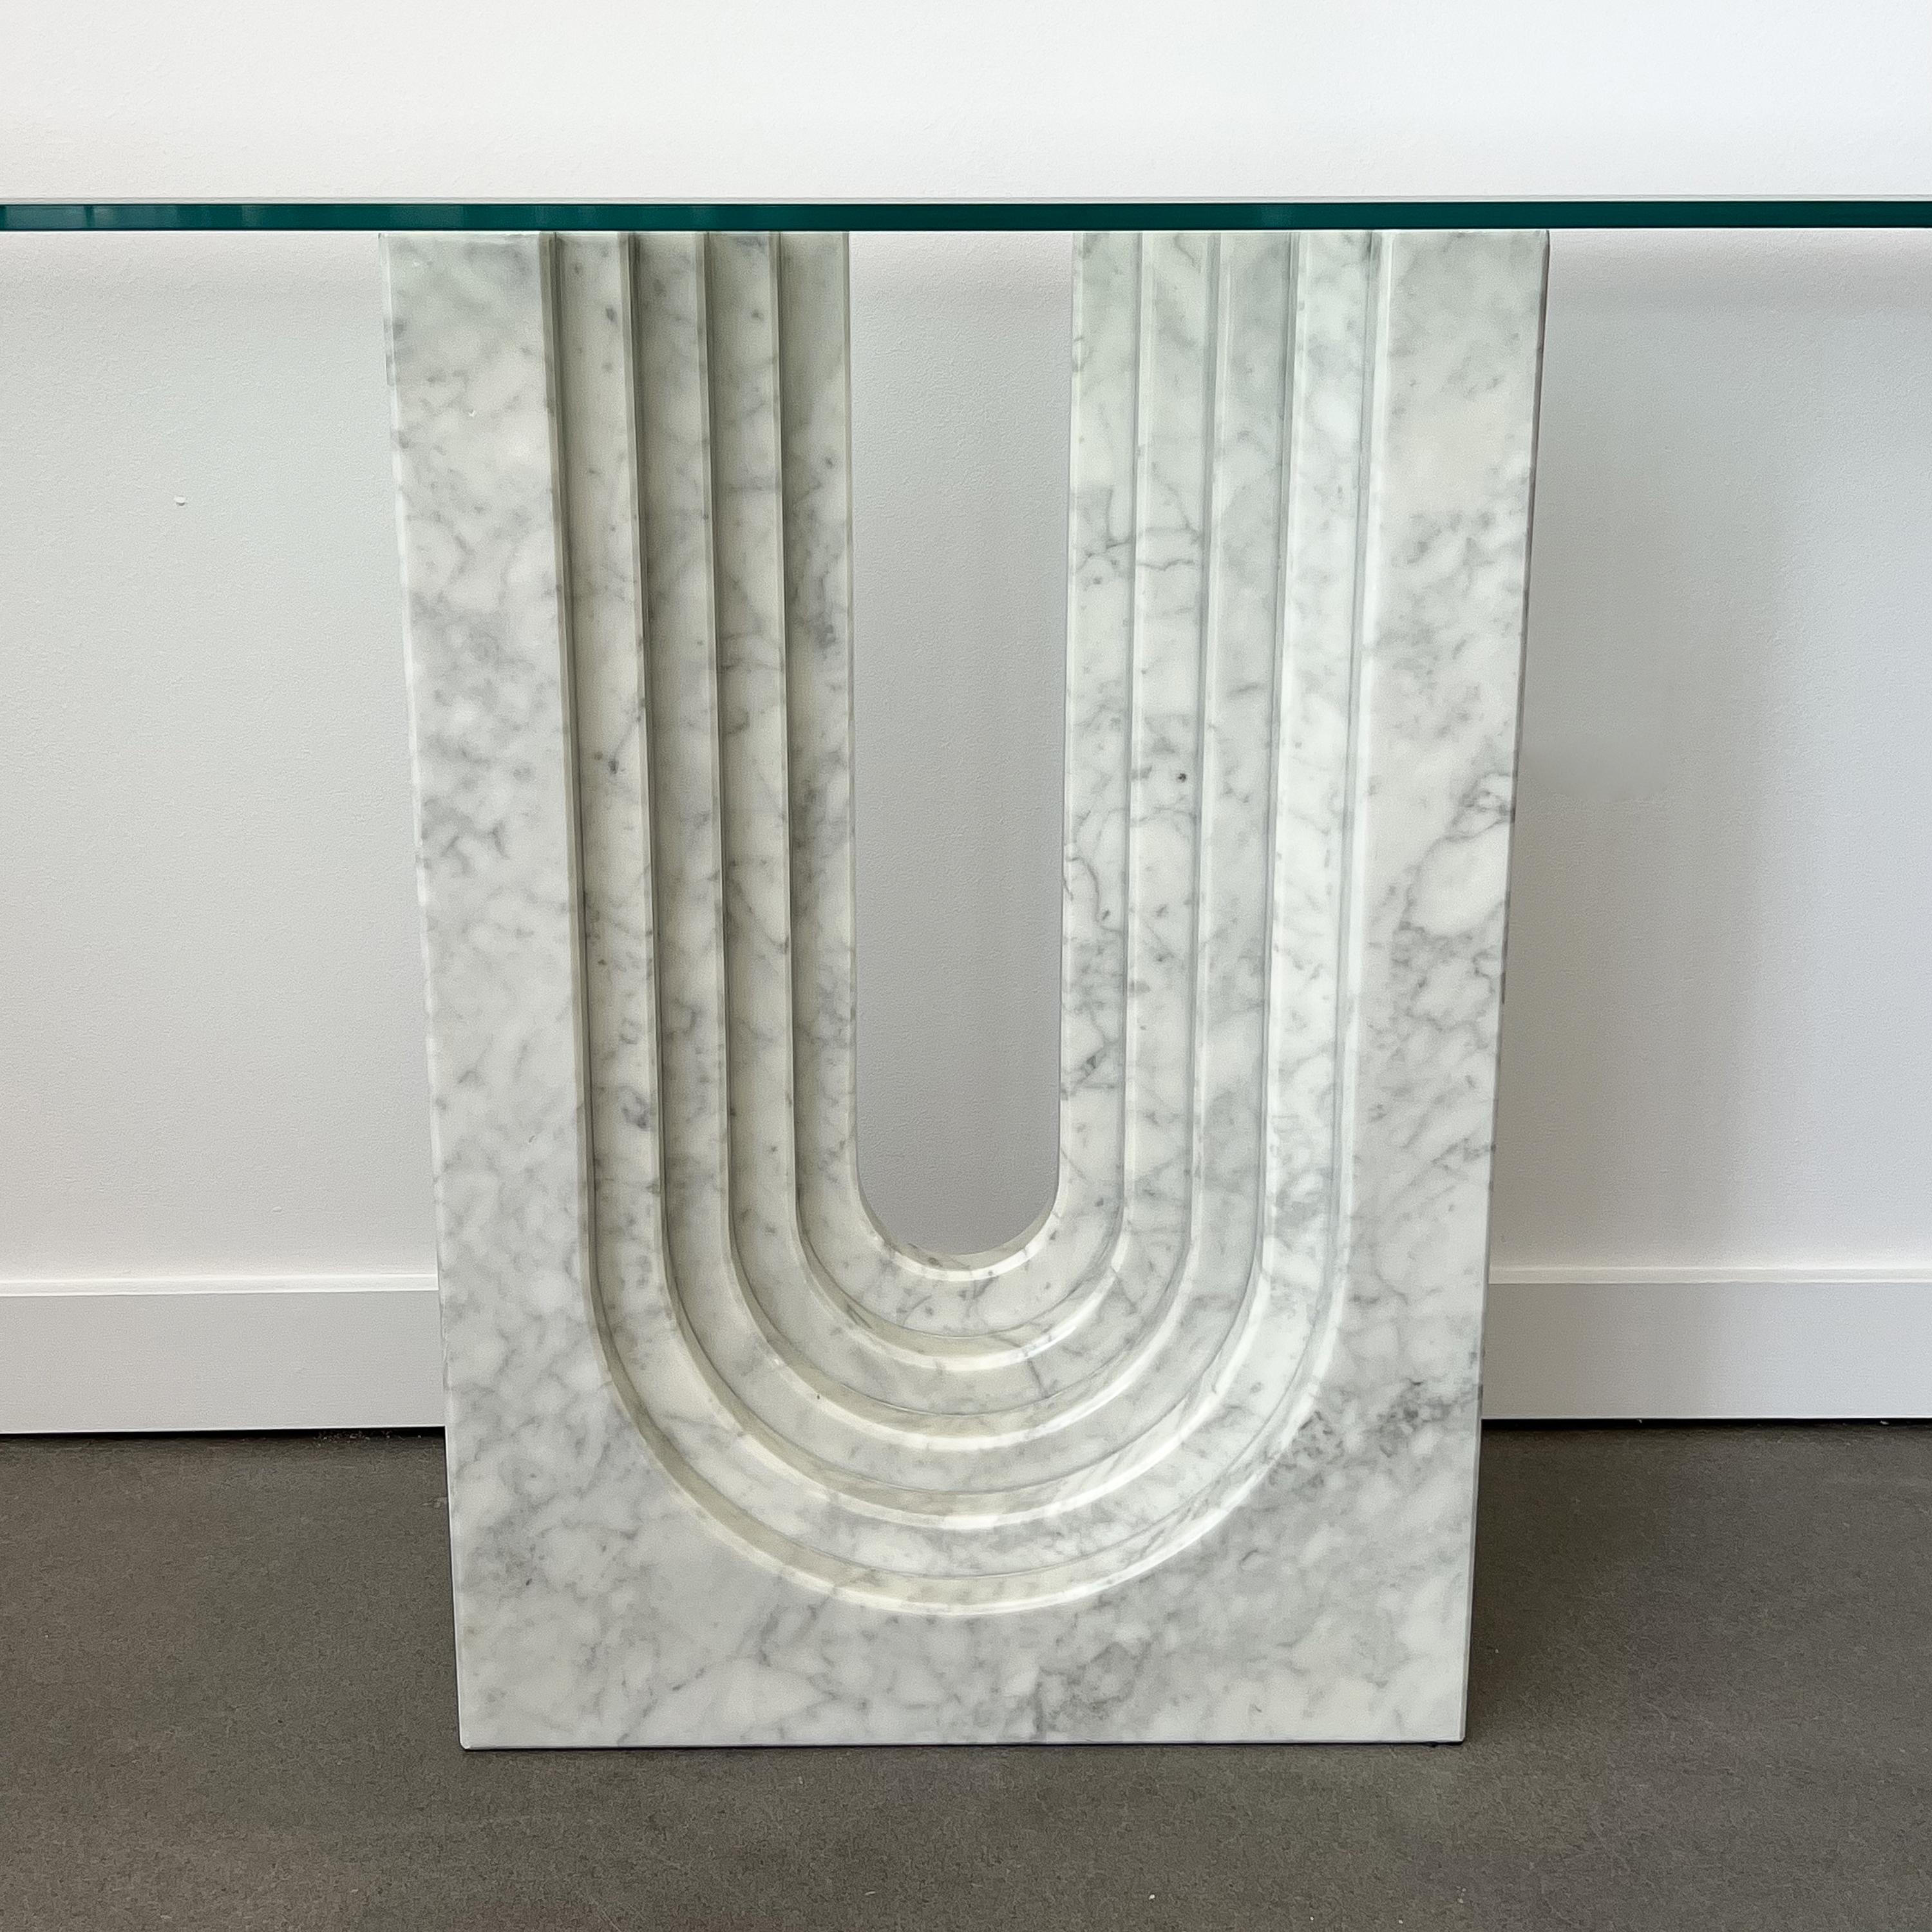 Carrara Marble Carlo Scarpa Modern Marble and Glass Console Table for Cattelan Italia